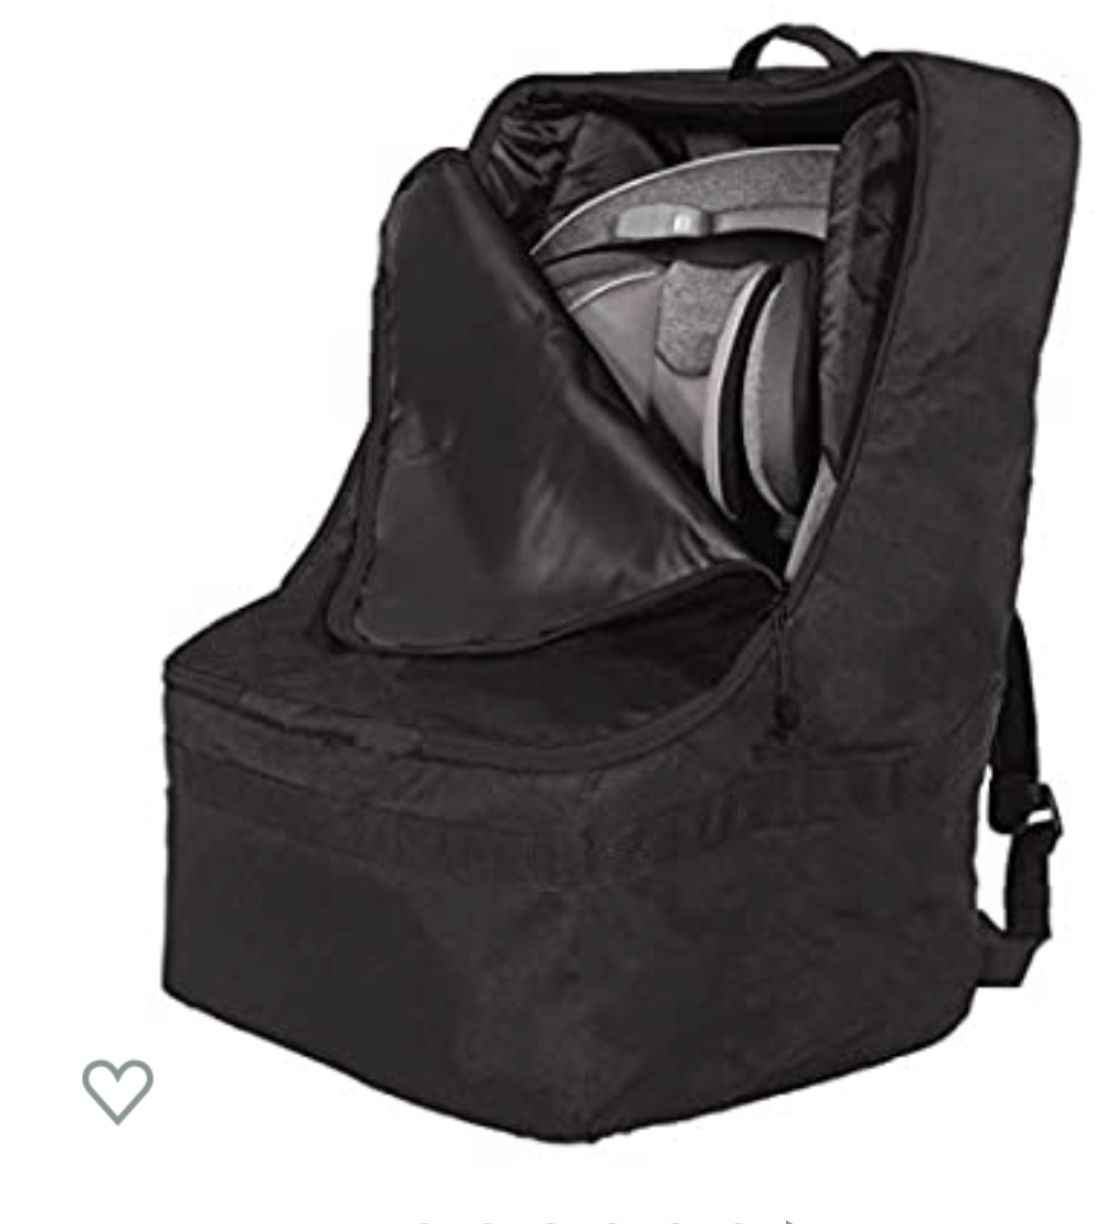 Car seat cover traveling case